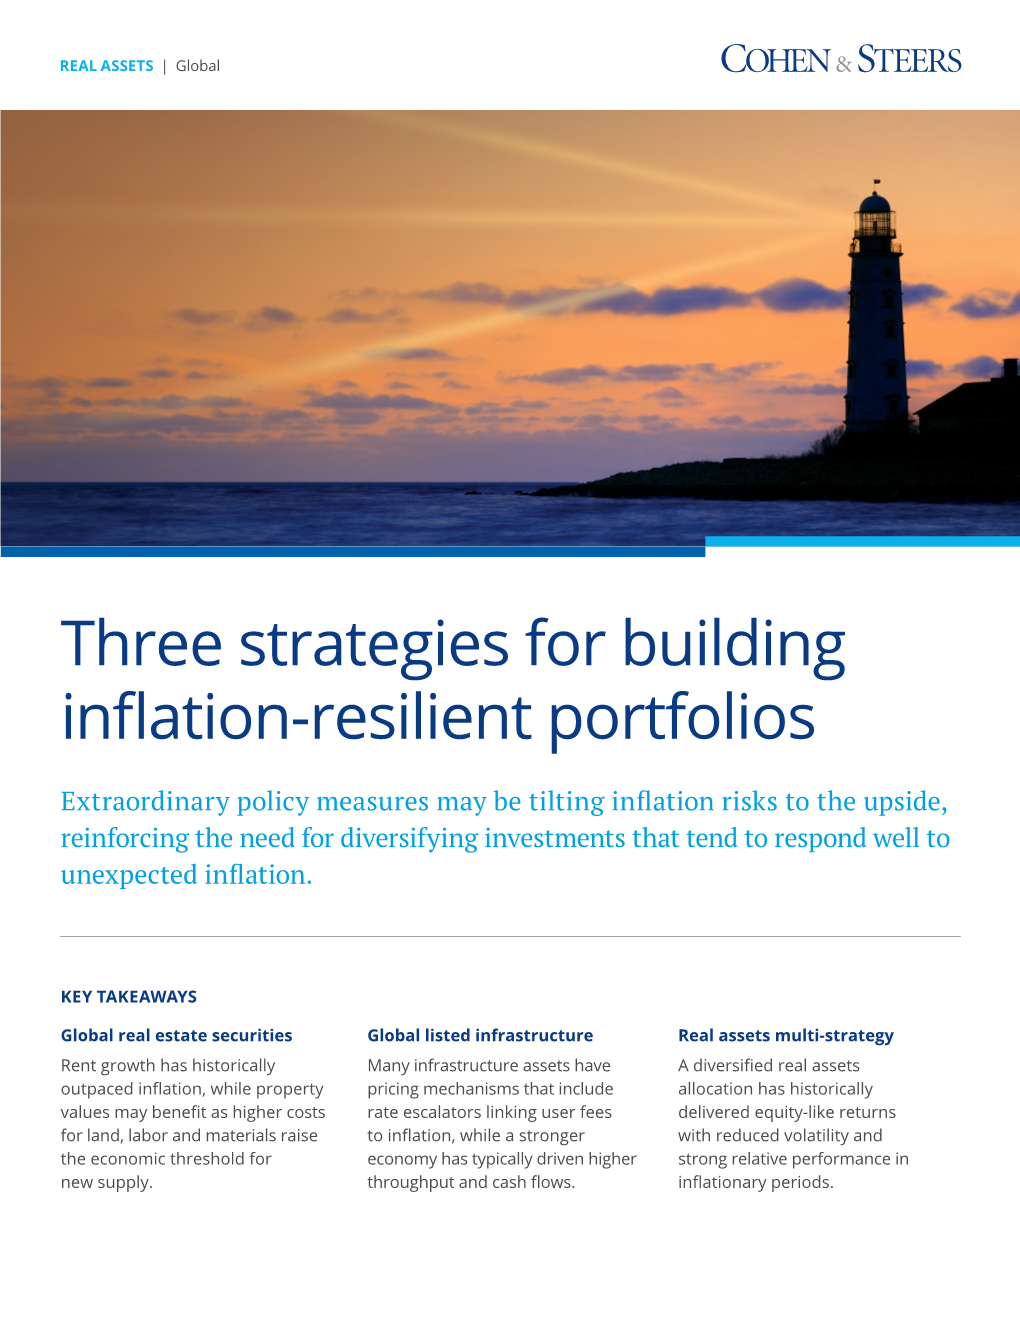 Three Strategies for Building Inflation-Resilient Portfolios